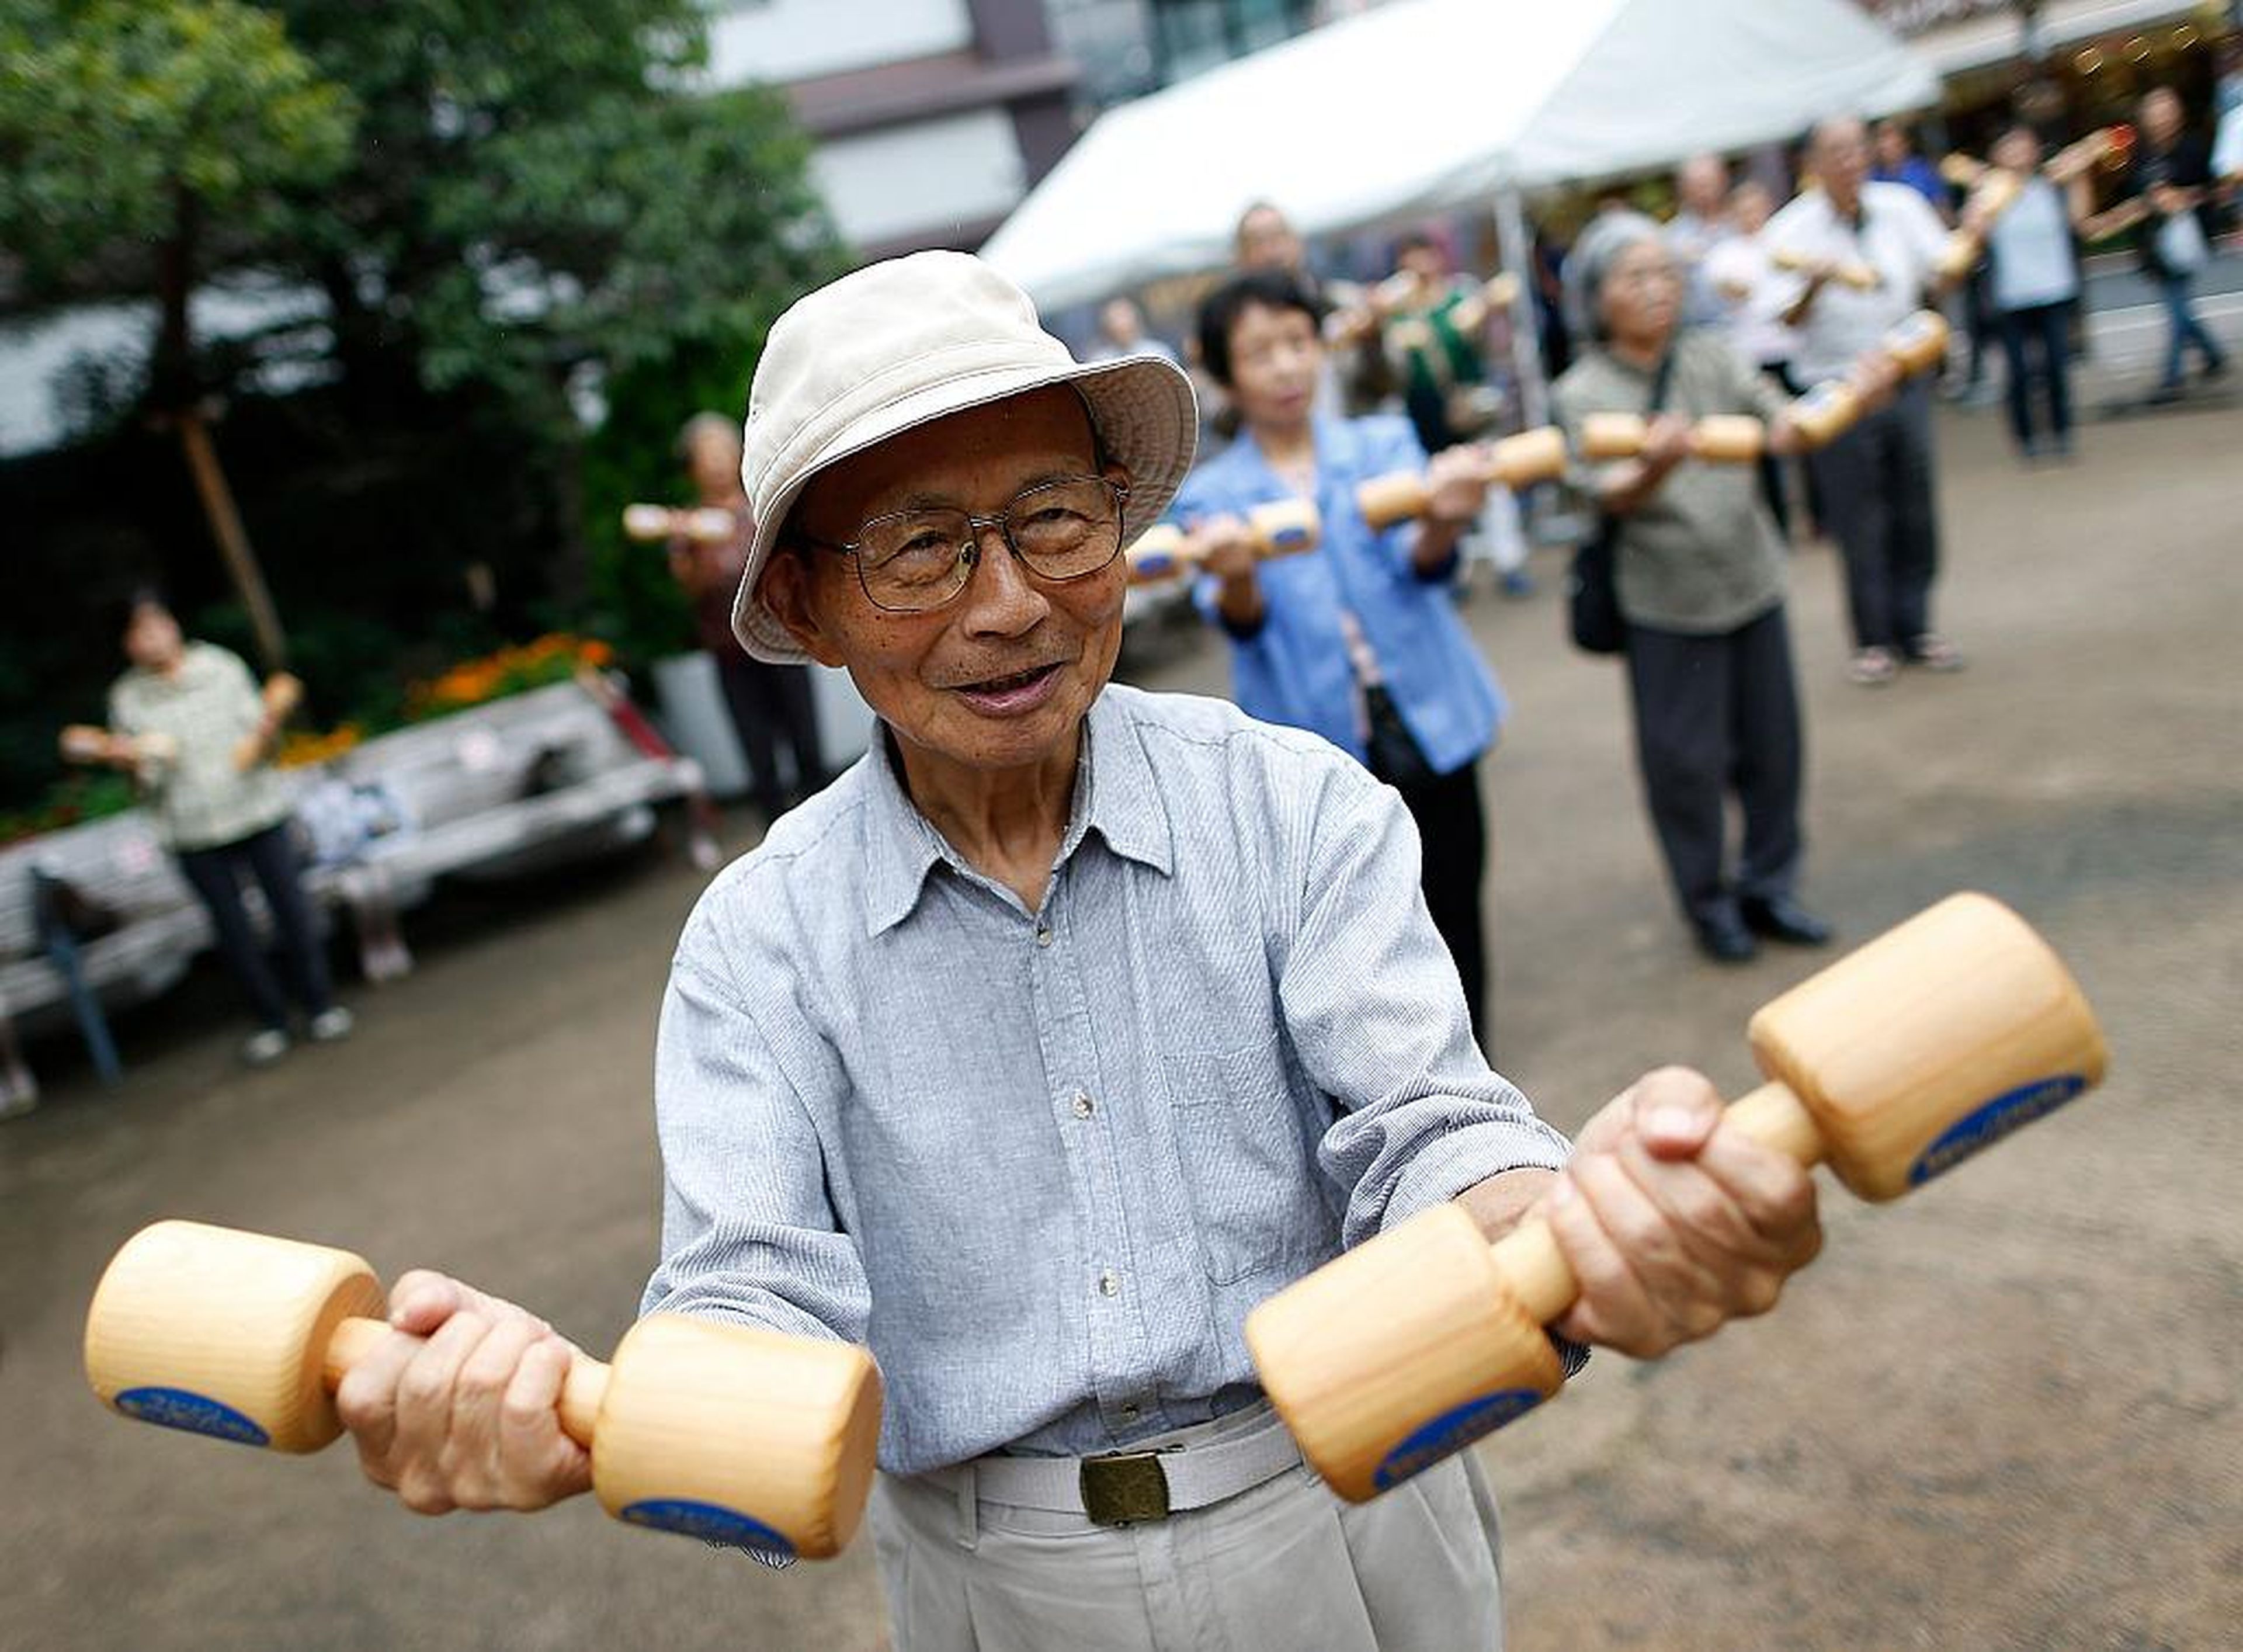 Elderly people exercise on Japan's 'Respect for the Aged Day.' More than a quarter of Japan's population is over 65.